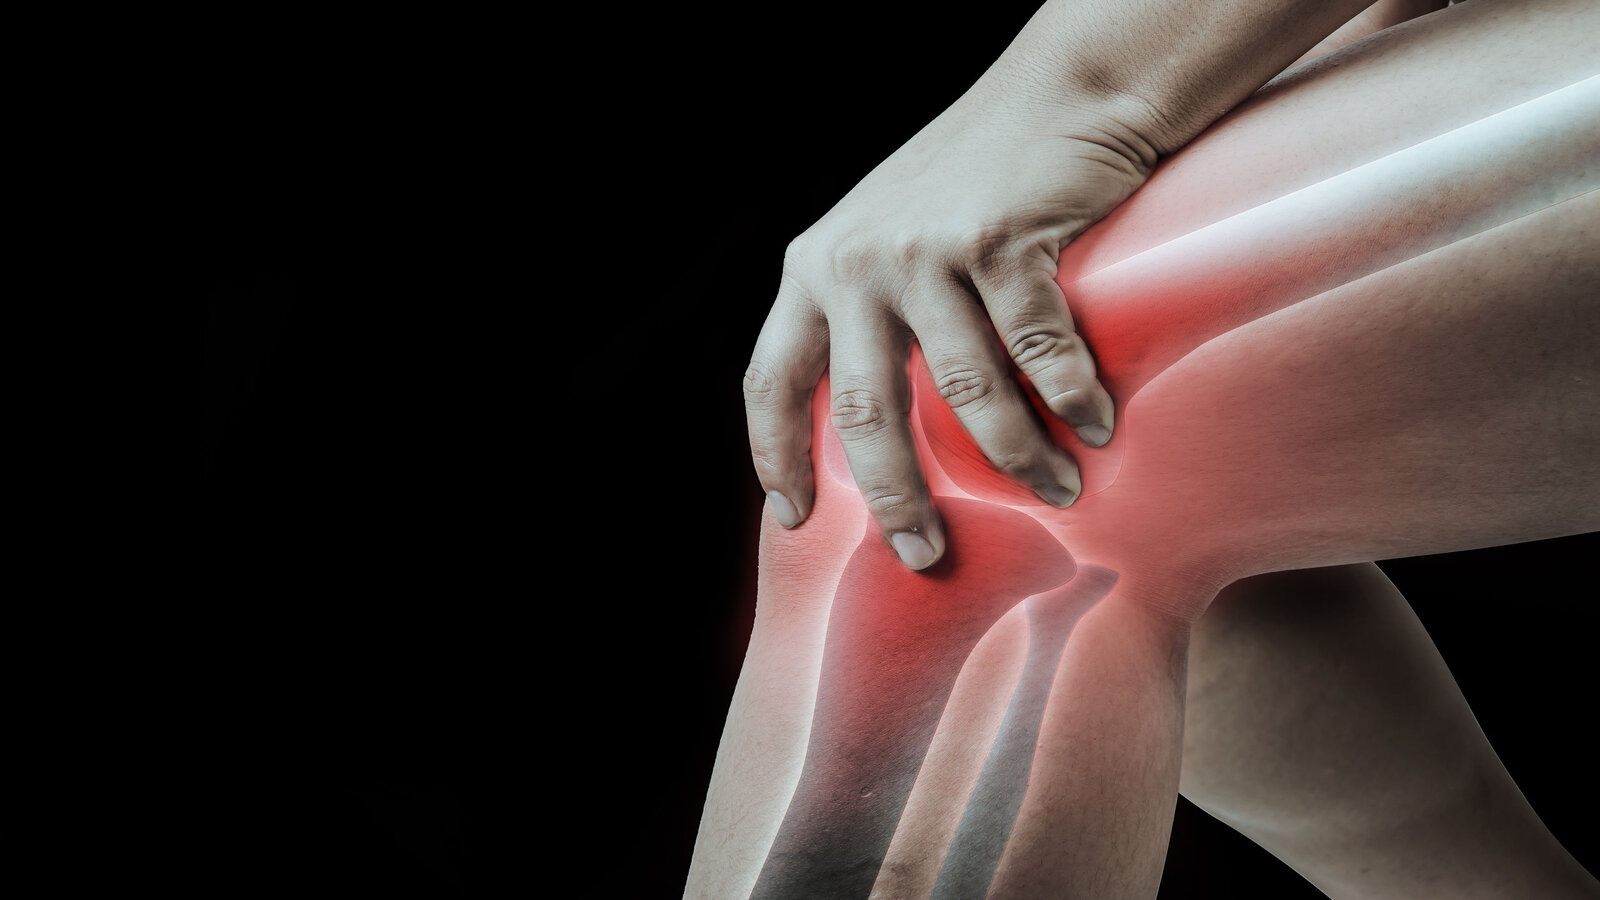 knee injury in humans .knee pain,joint pains people medical, mon